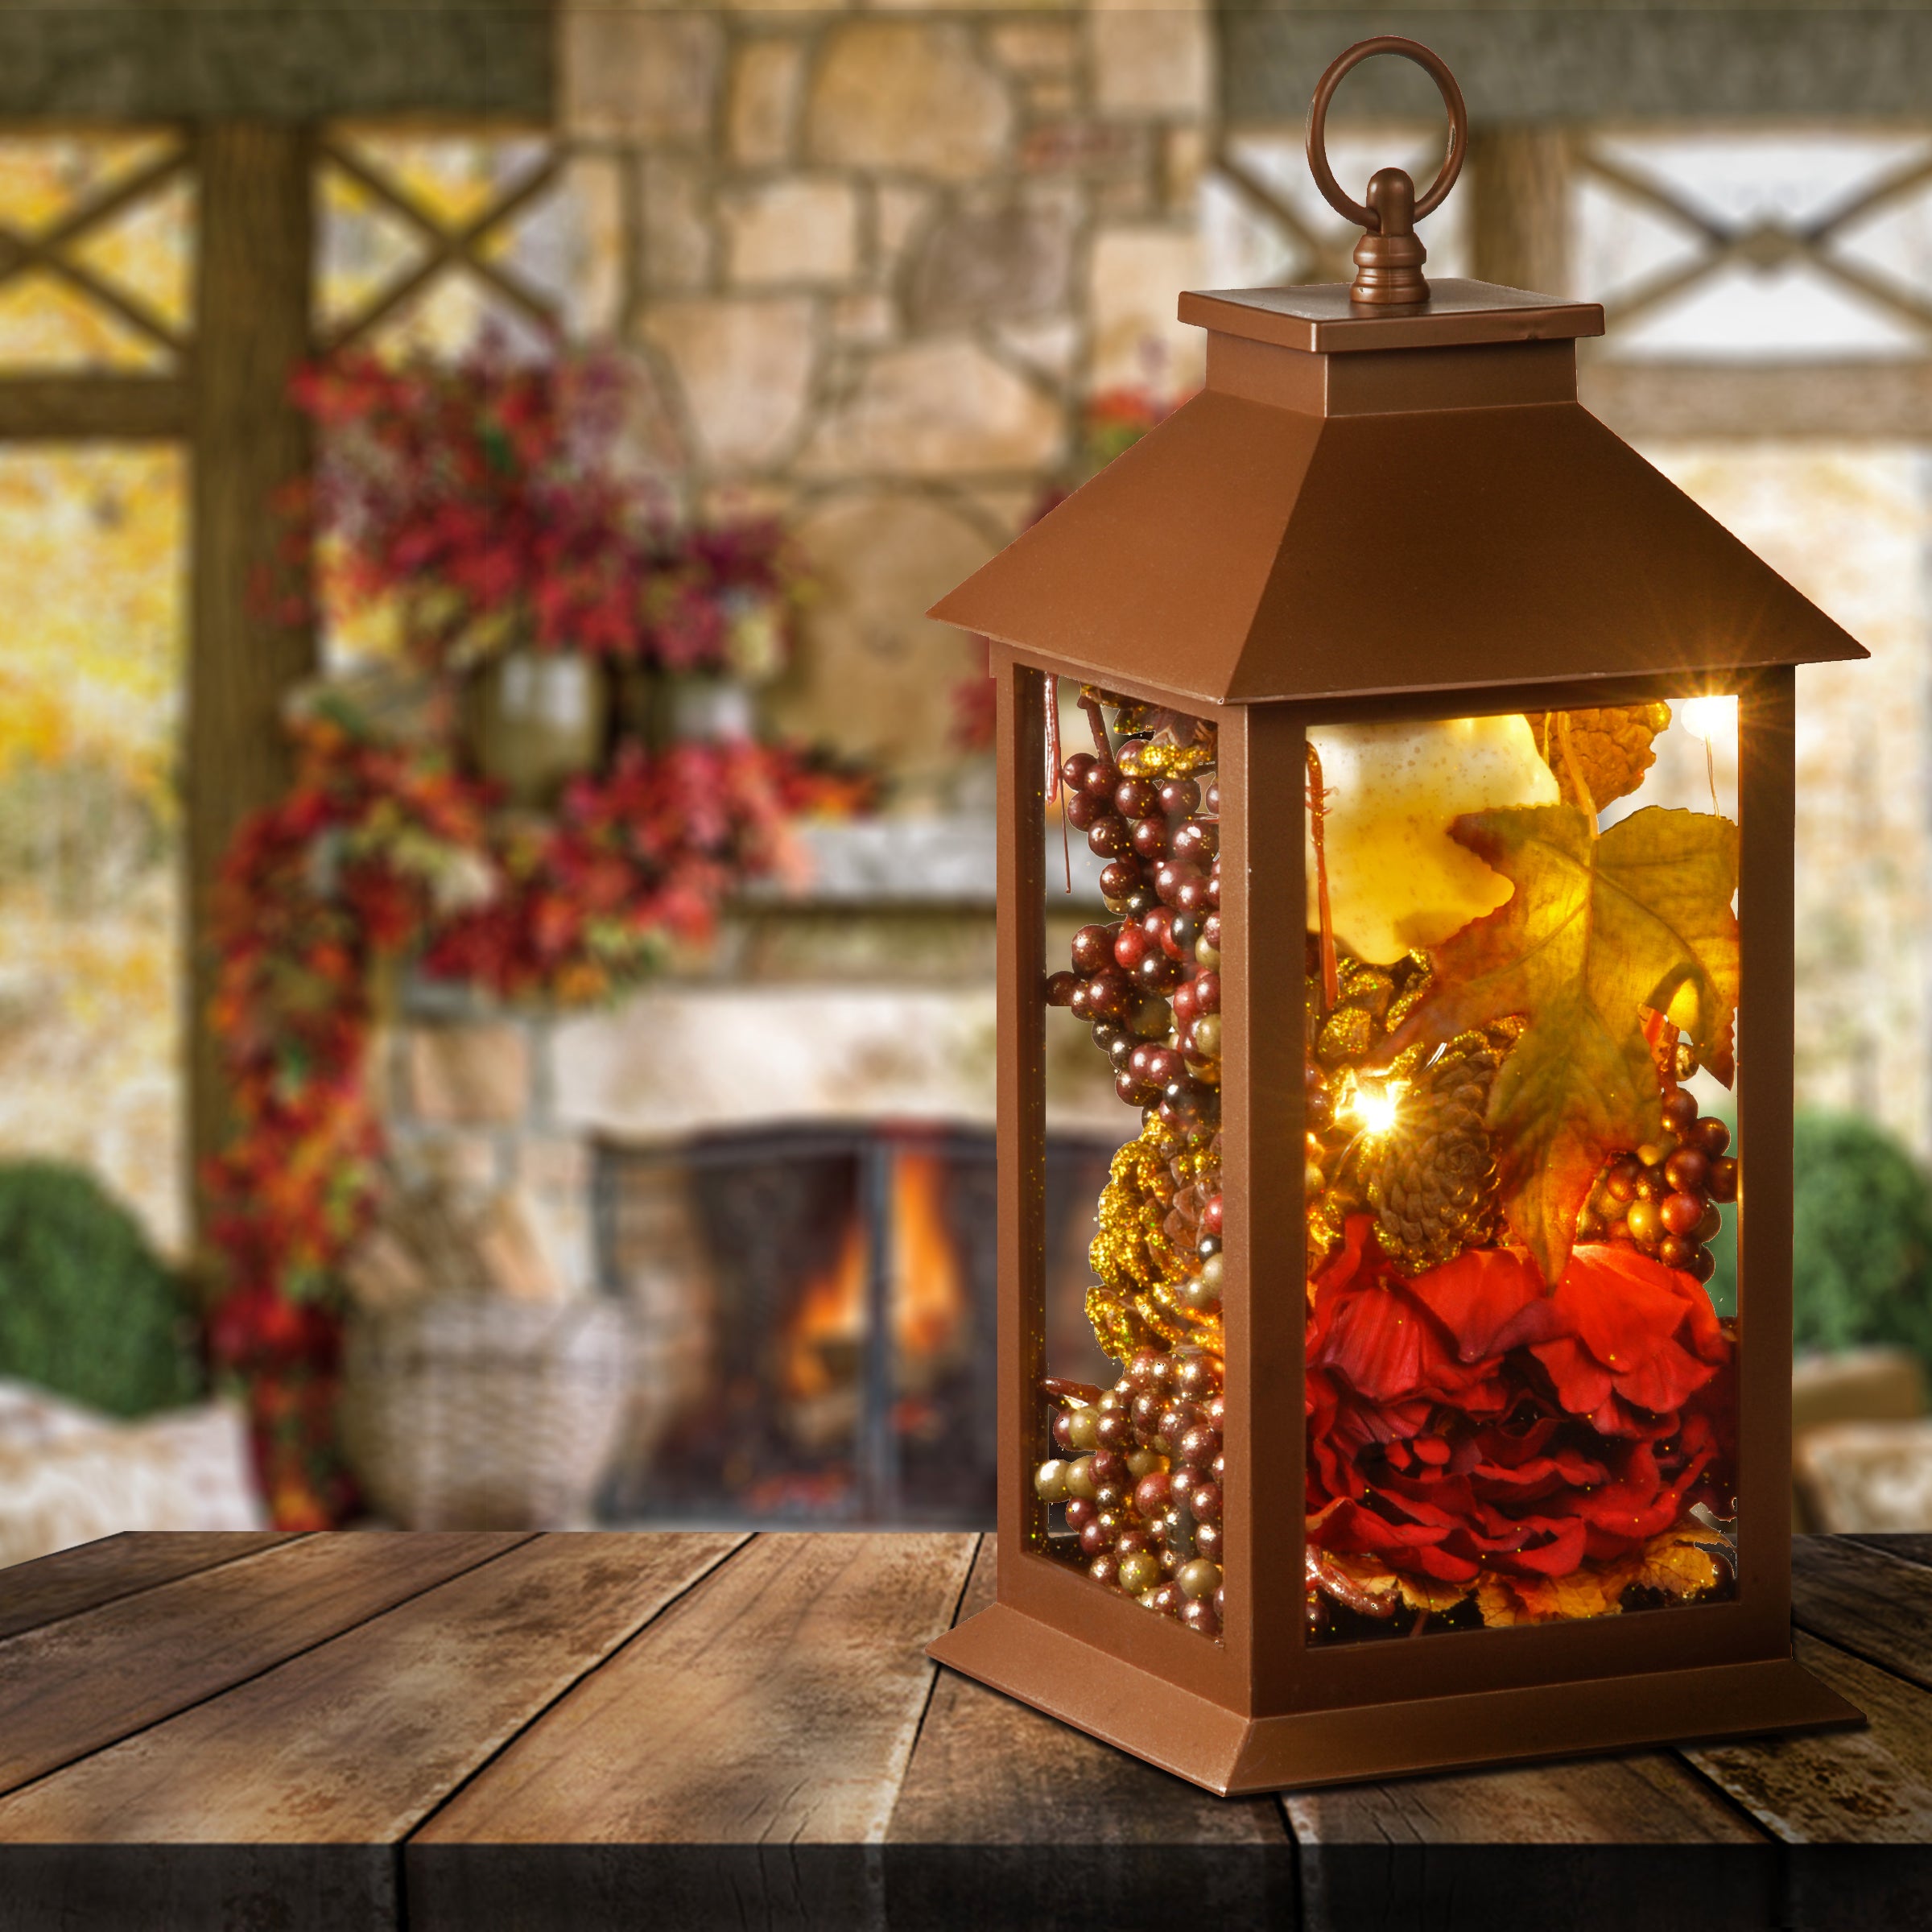 Harvest Lantern with LED Lights, Filled with Pumpkins, Leaves, Flowers, Berry Clusters, 12 inches